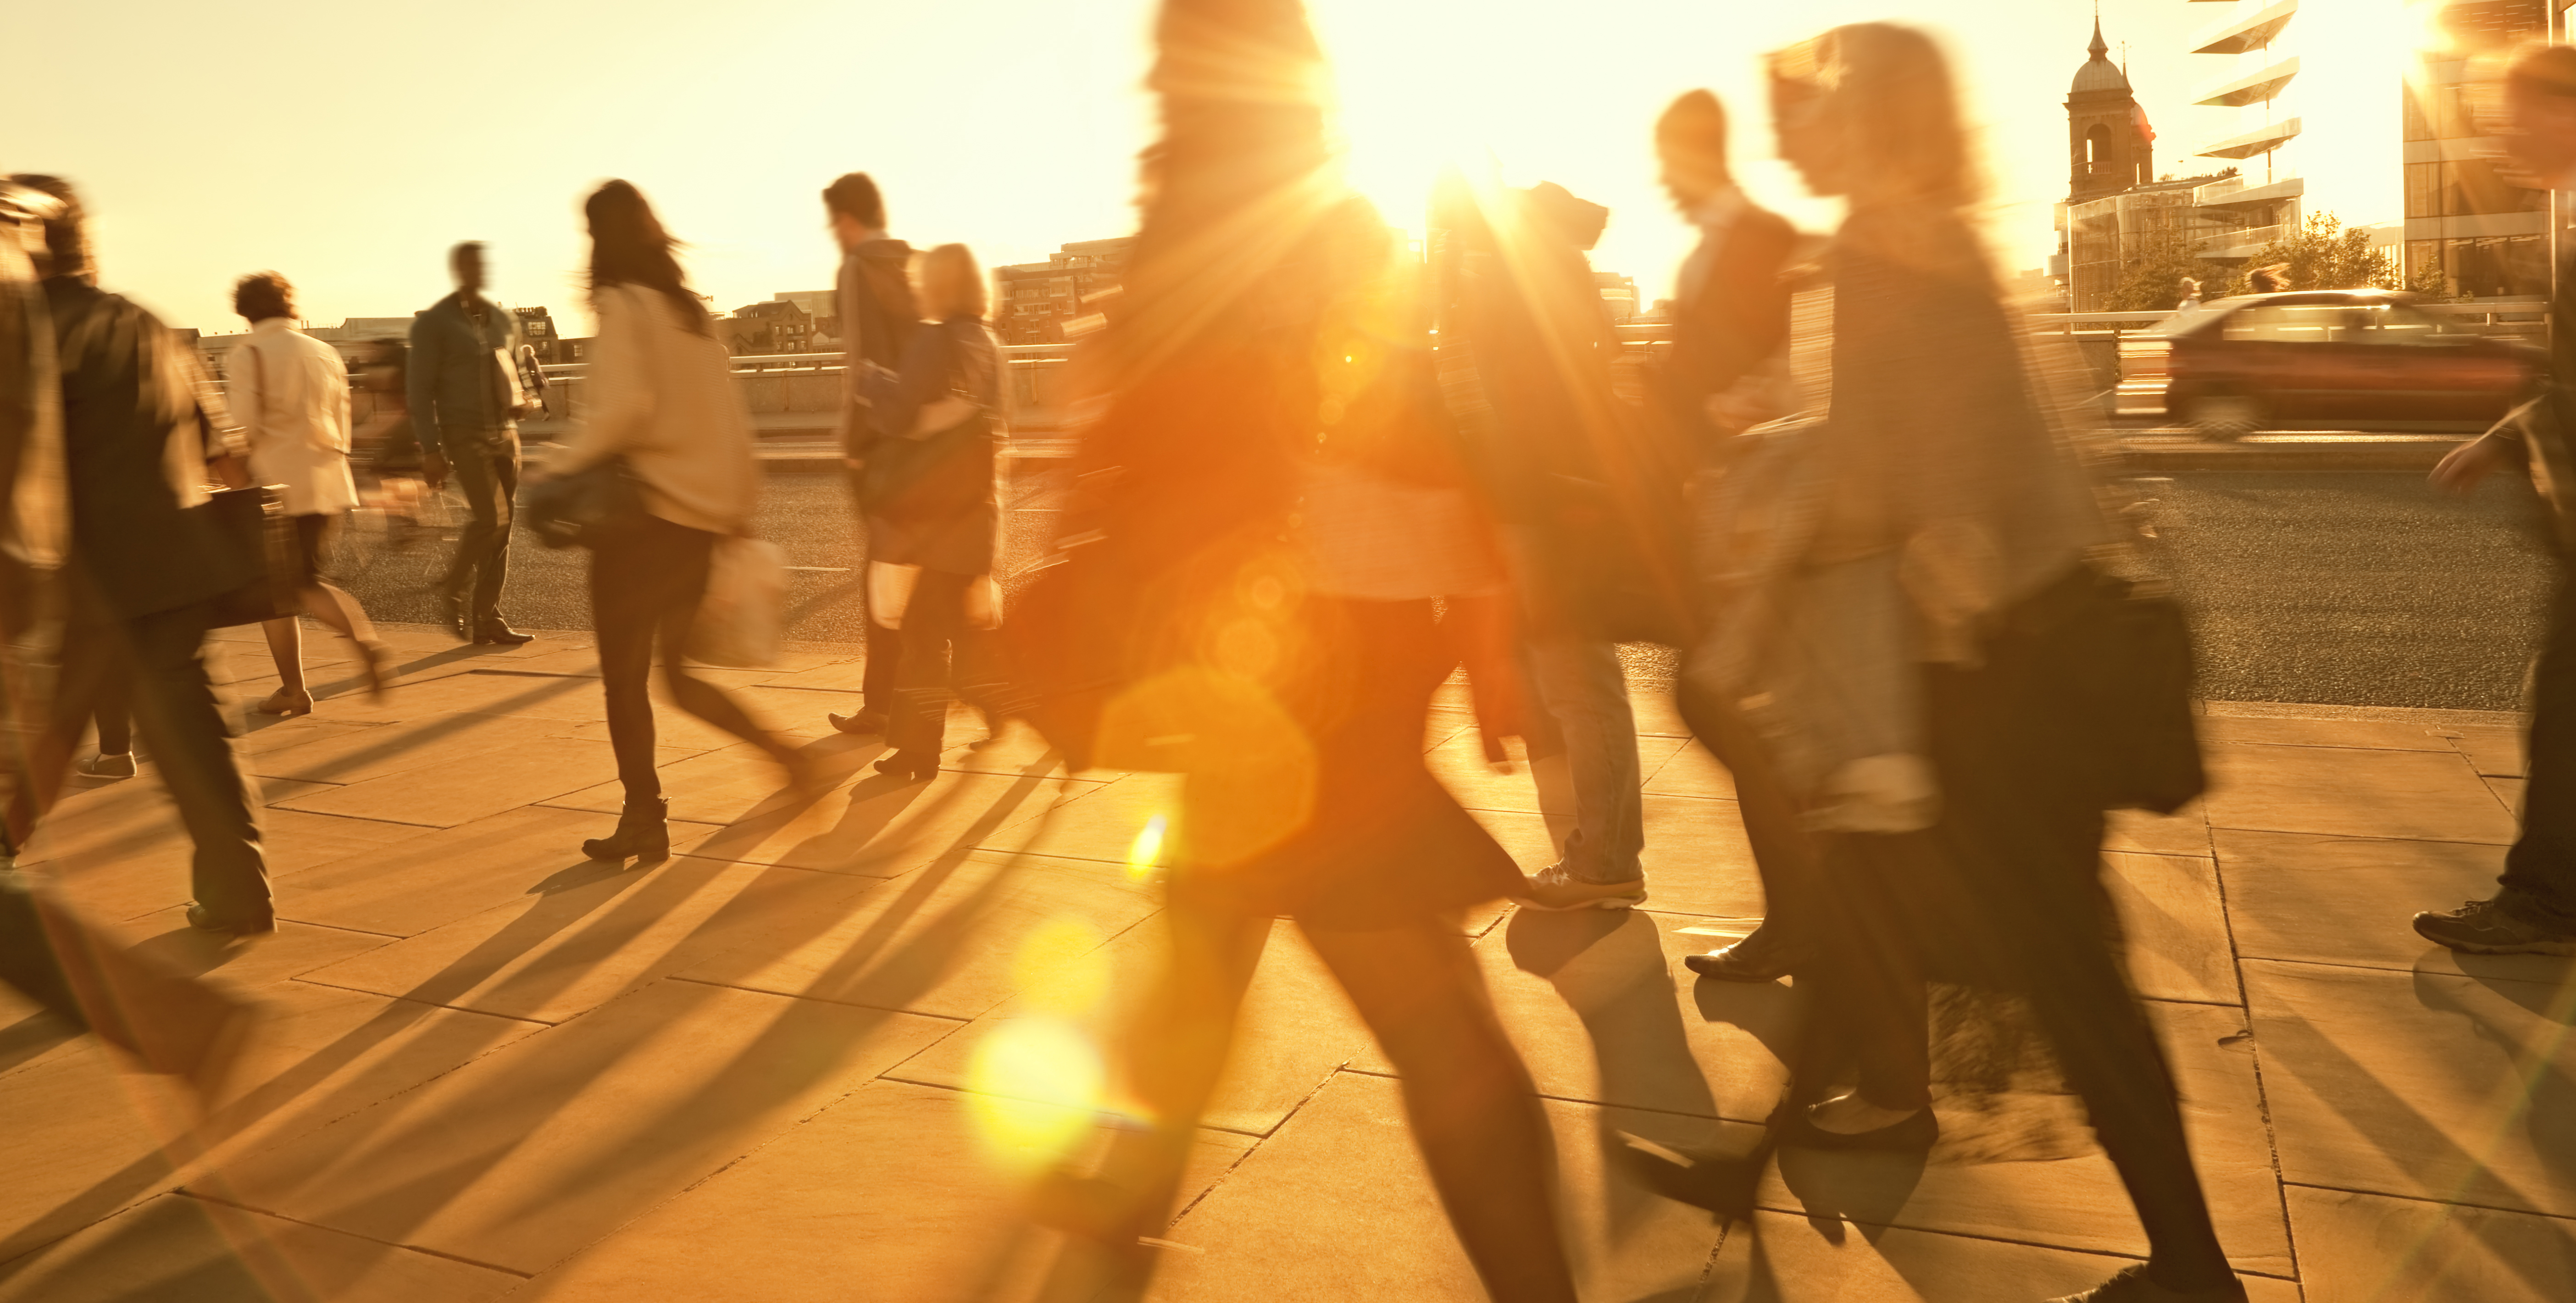 Motion blurred photo of people walking backlit by the sun.